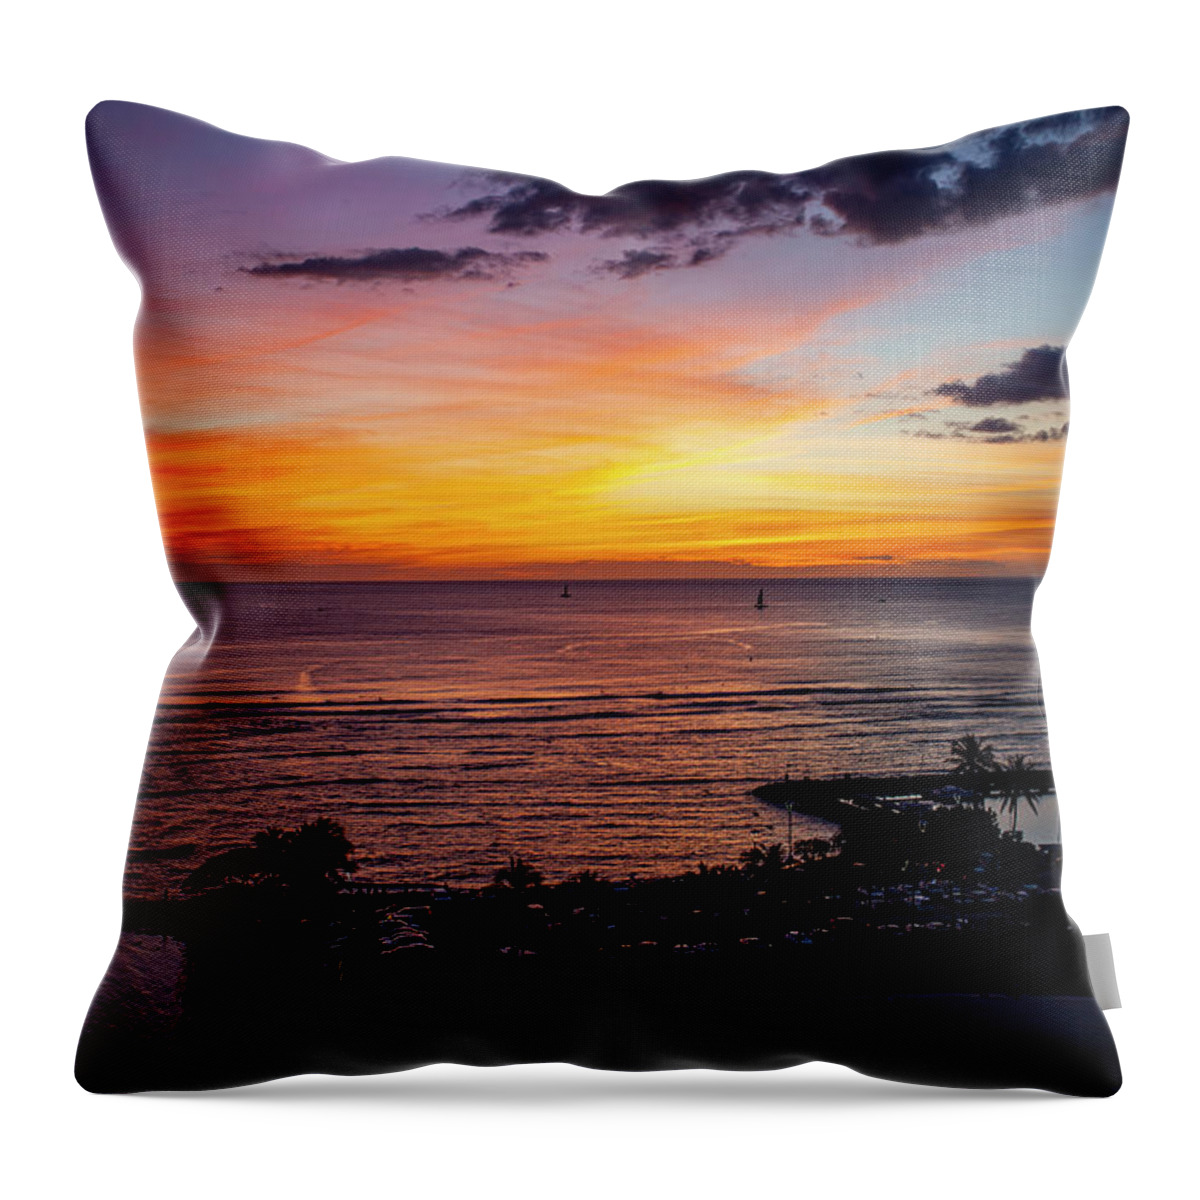 Hawaii Throw Pillow featuring the photograph Waikiki Sunset 7a by Anthony Jones